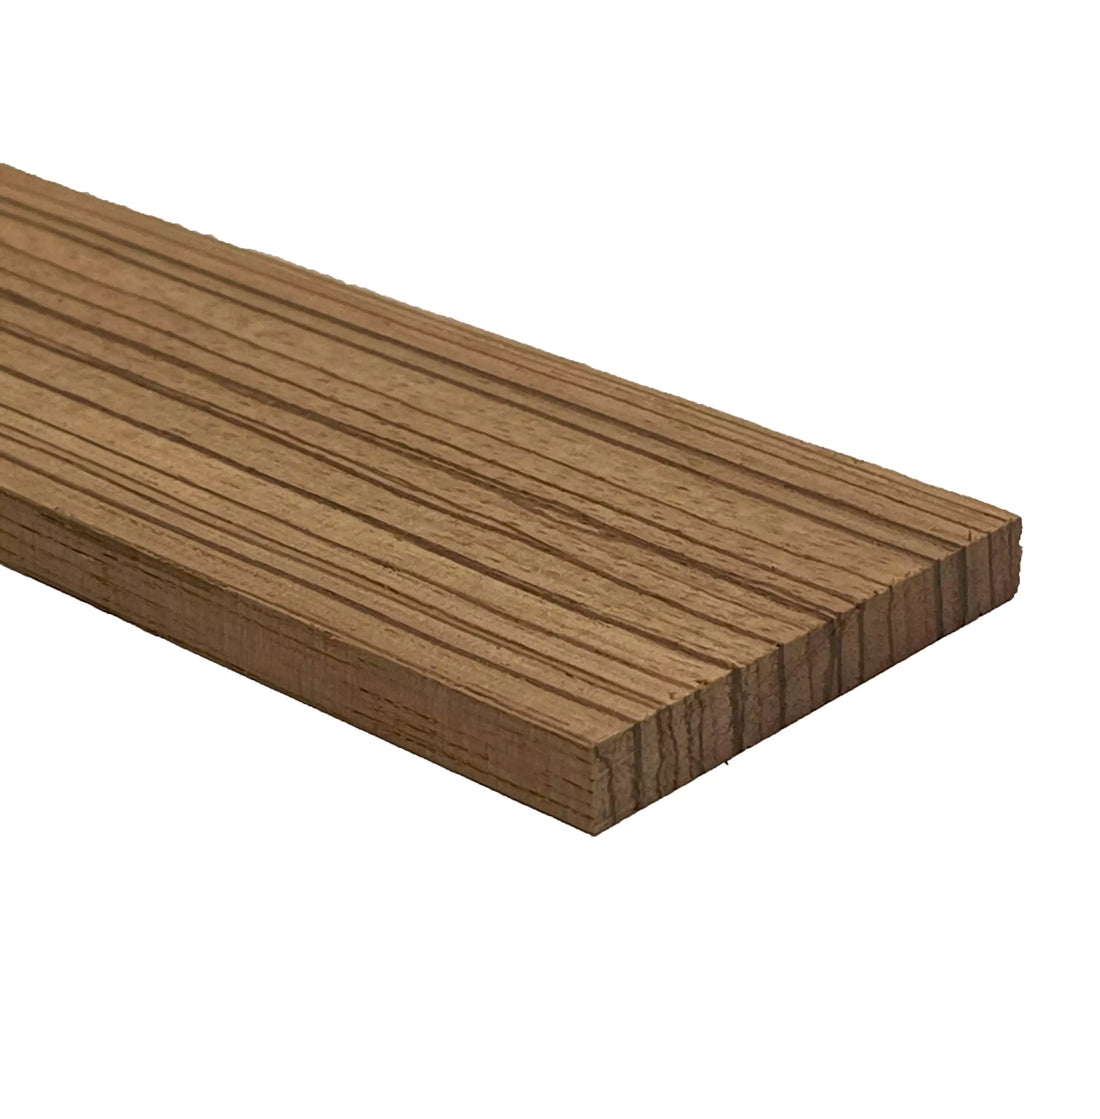 Pack of 3, Zebrawood Guitar Fingerboard Blanks 21&quot; x 2-1/2&quot; x 3/8&quot; - Exotic Wood Zone - Buy online Across USA 